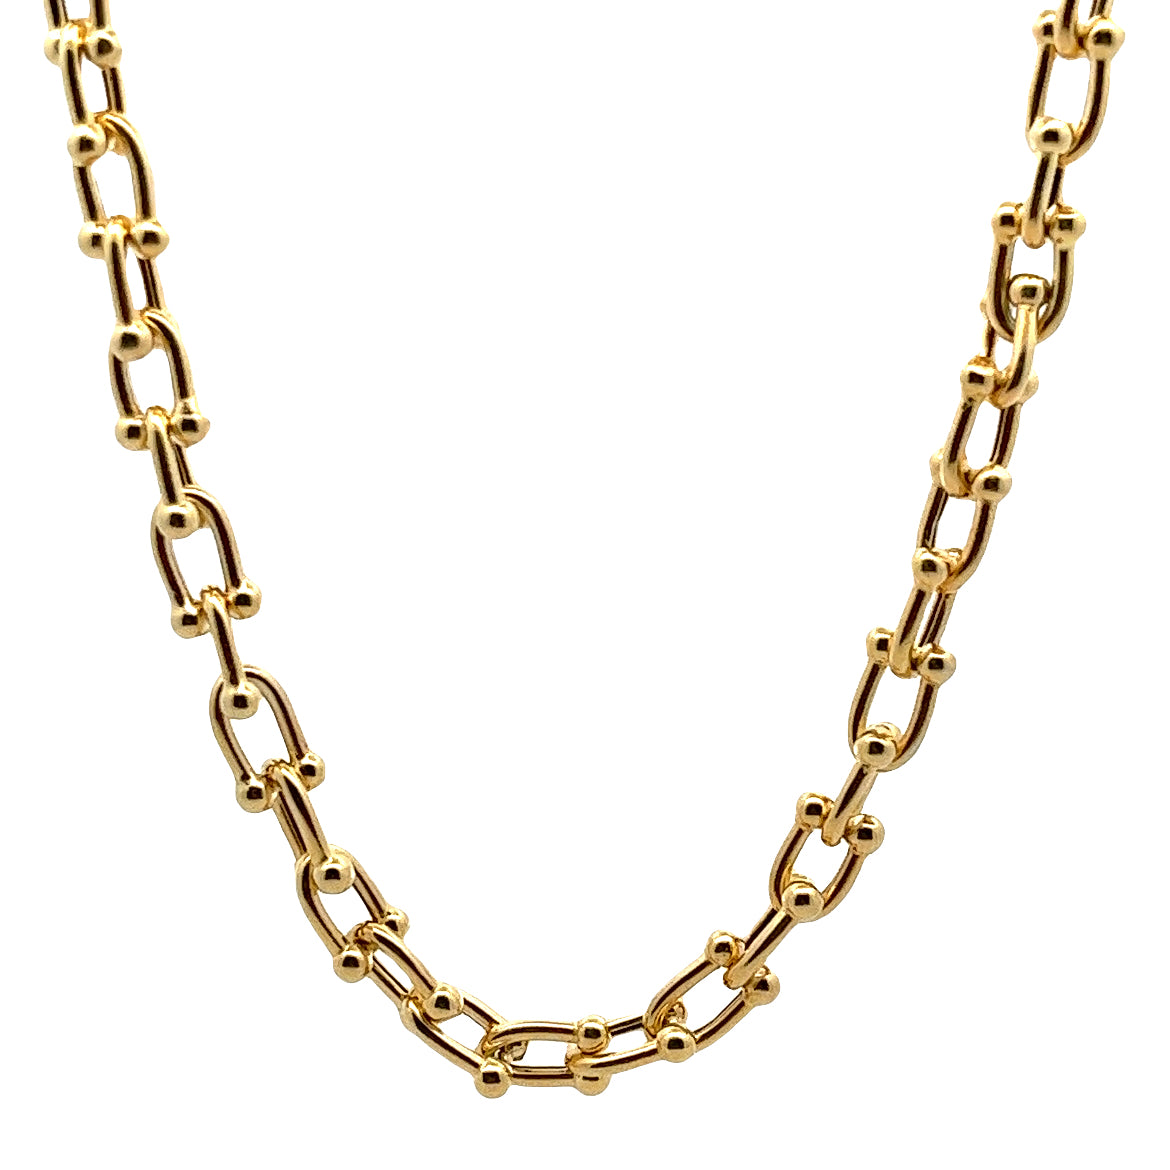 925 SILVER GOLD PLATED HORSE SHOE LINKS NECKLACE